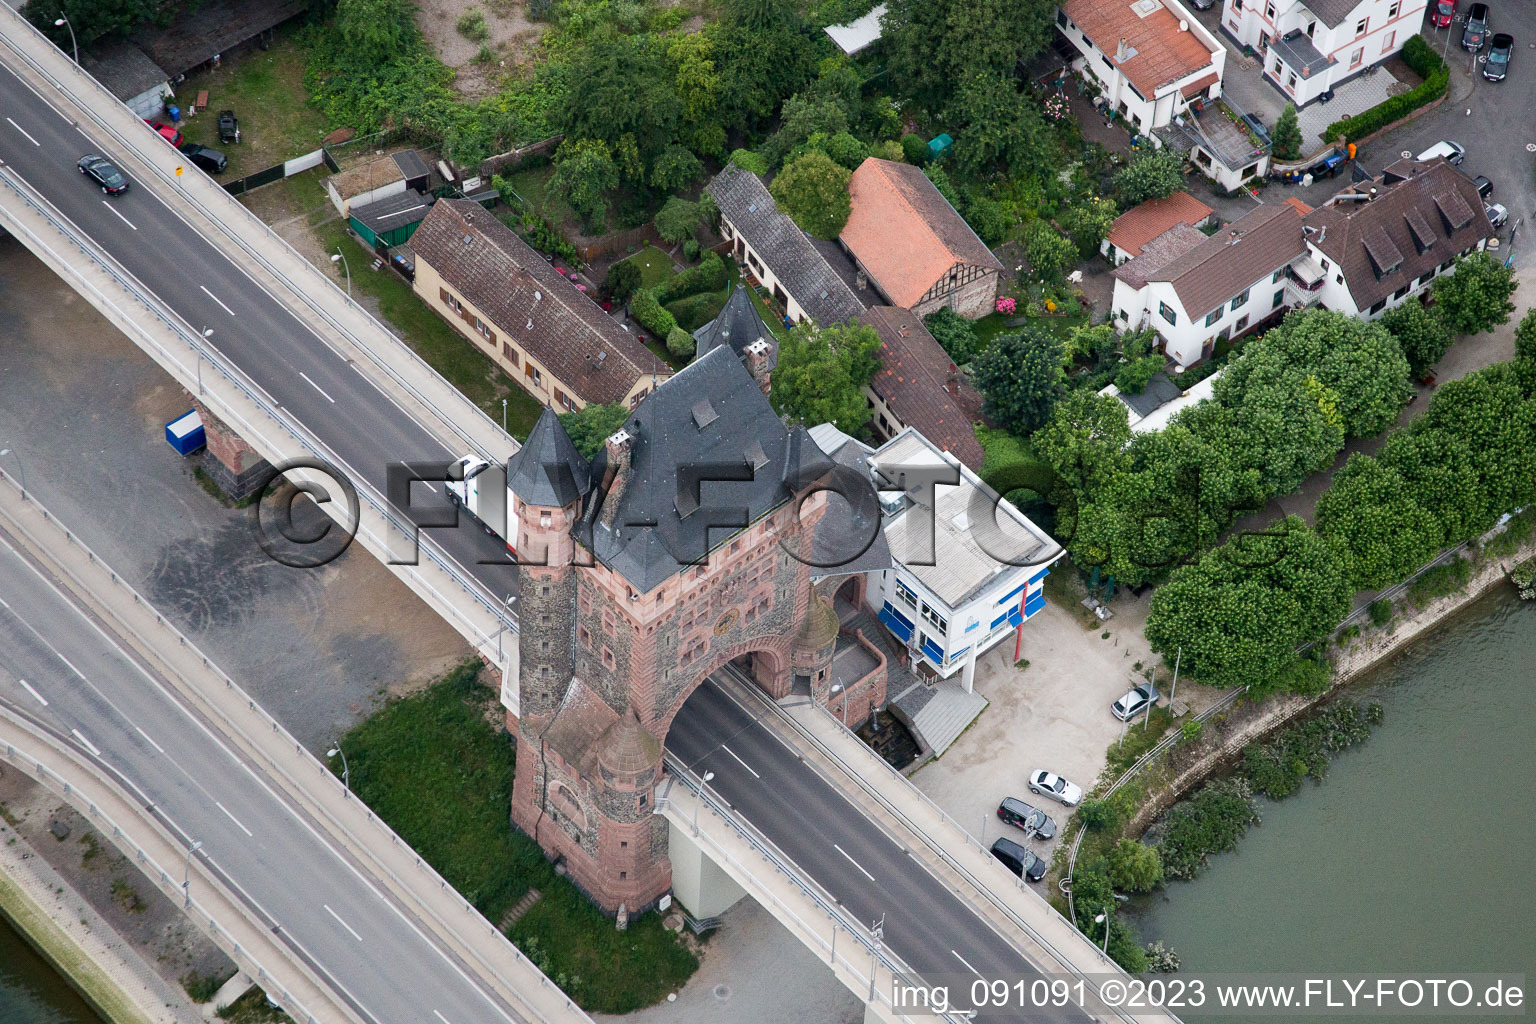 Aerial photograpy of Nibelungen Bridge over the Rhine in Worms in the state Rhineland-Palatinate, Germany